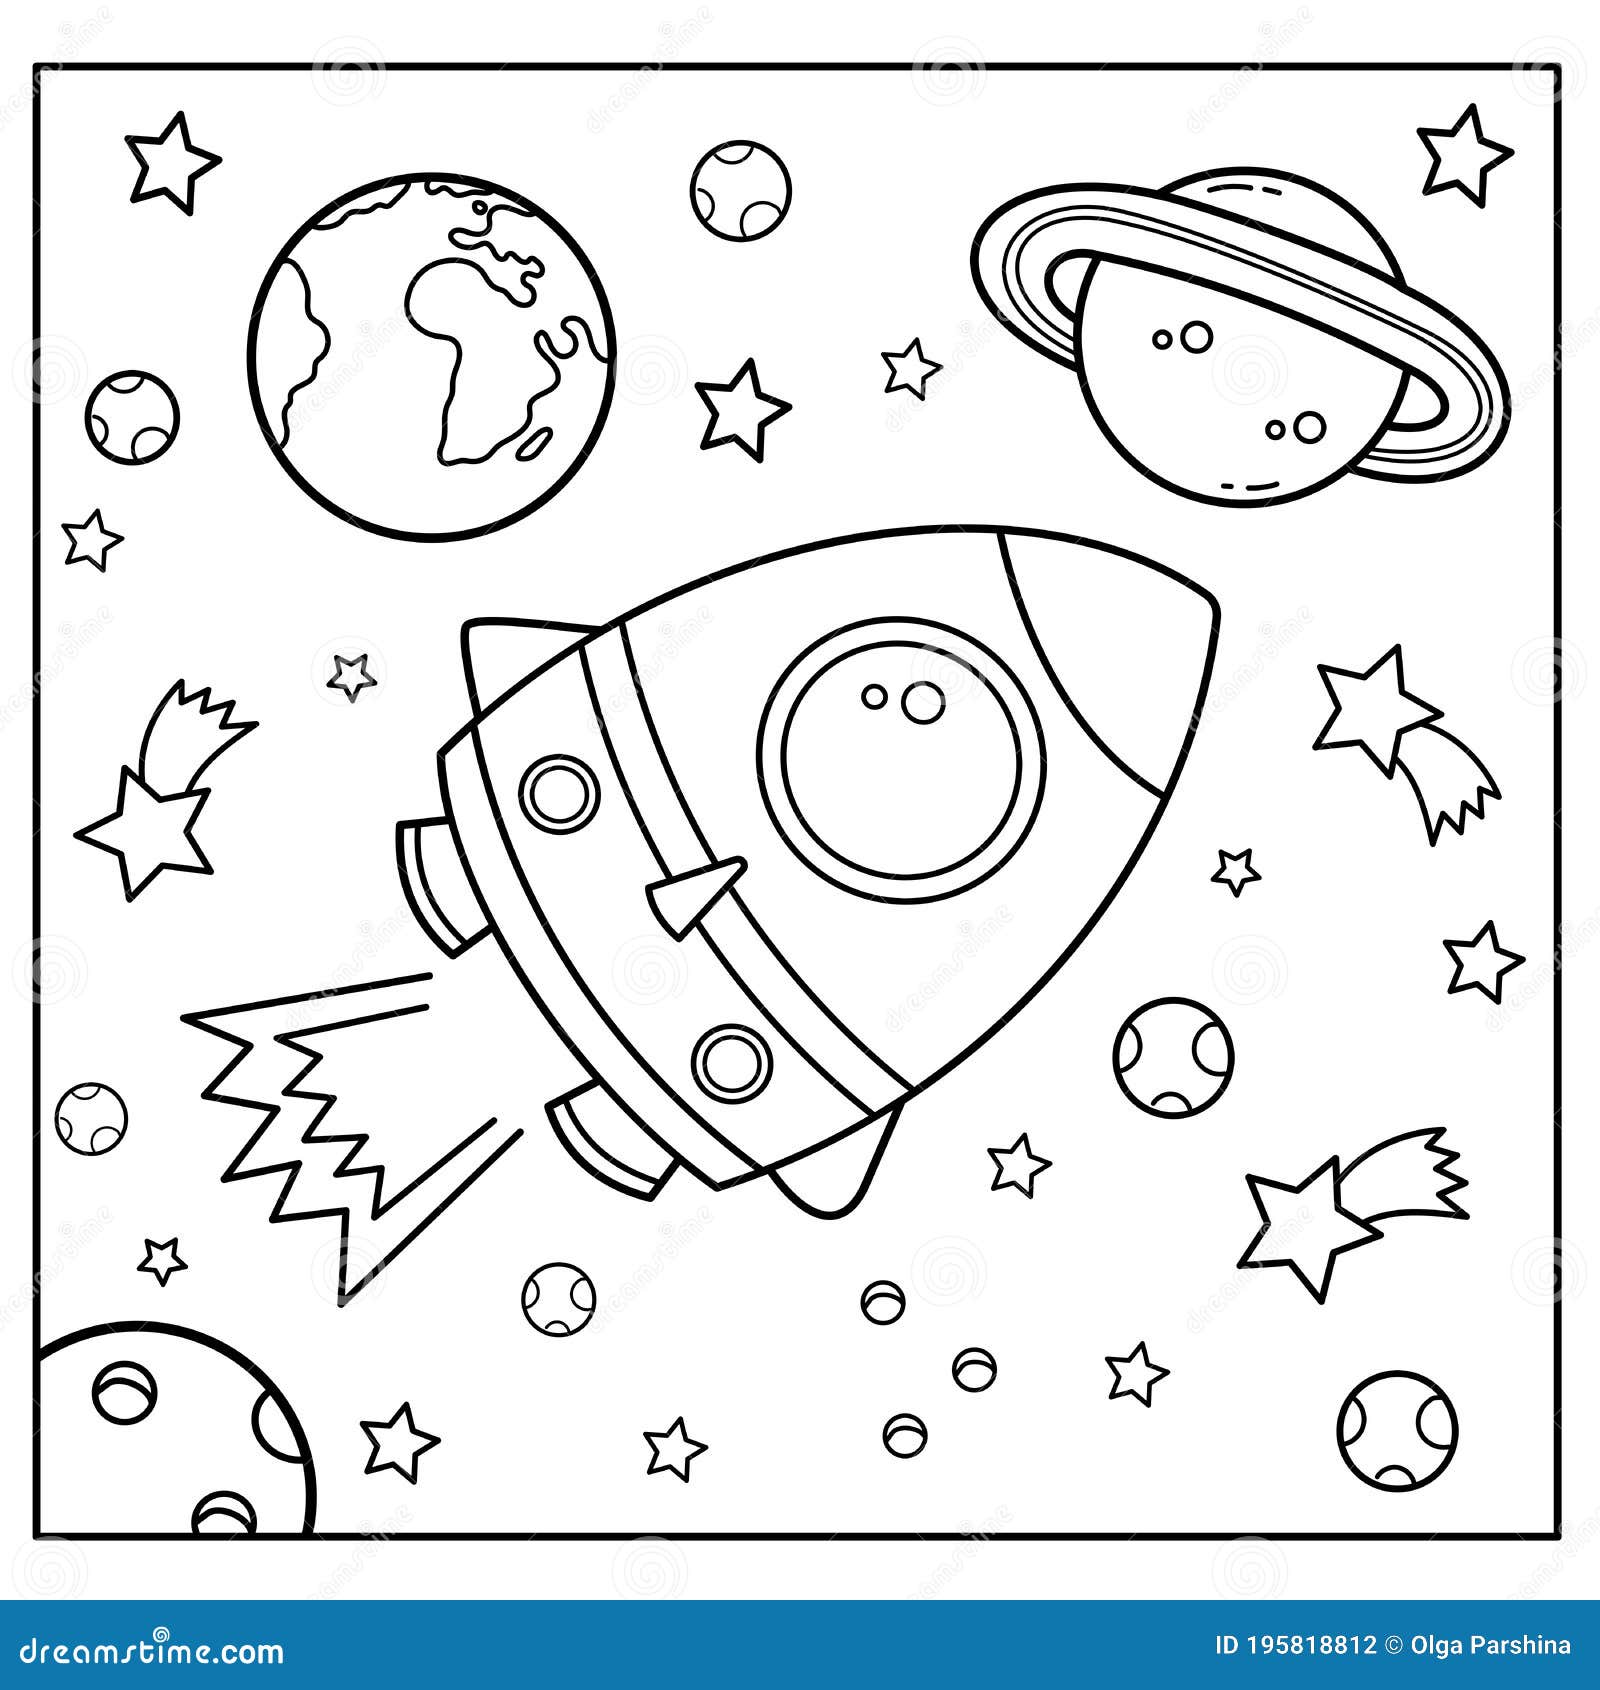 Coloring page outline of a cartoon rocket in space coloring book for kids stock vector